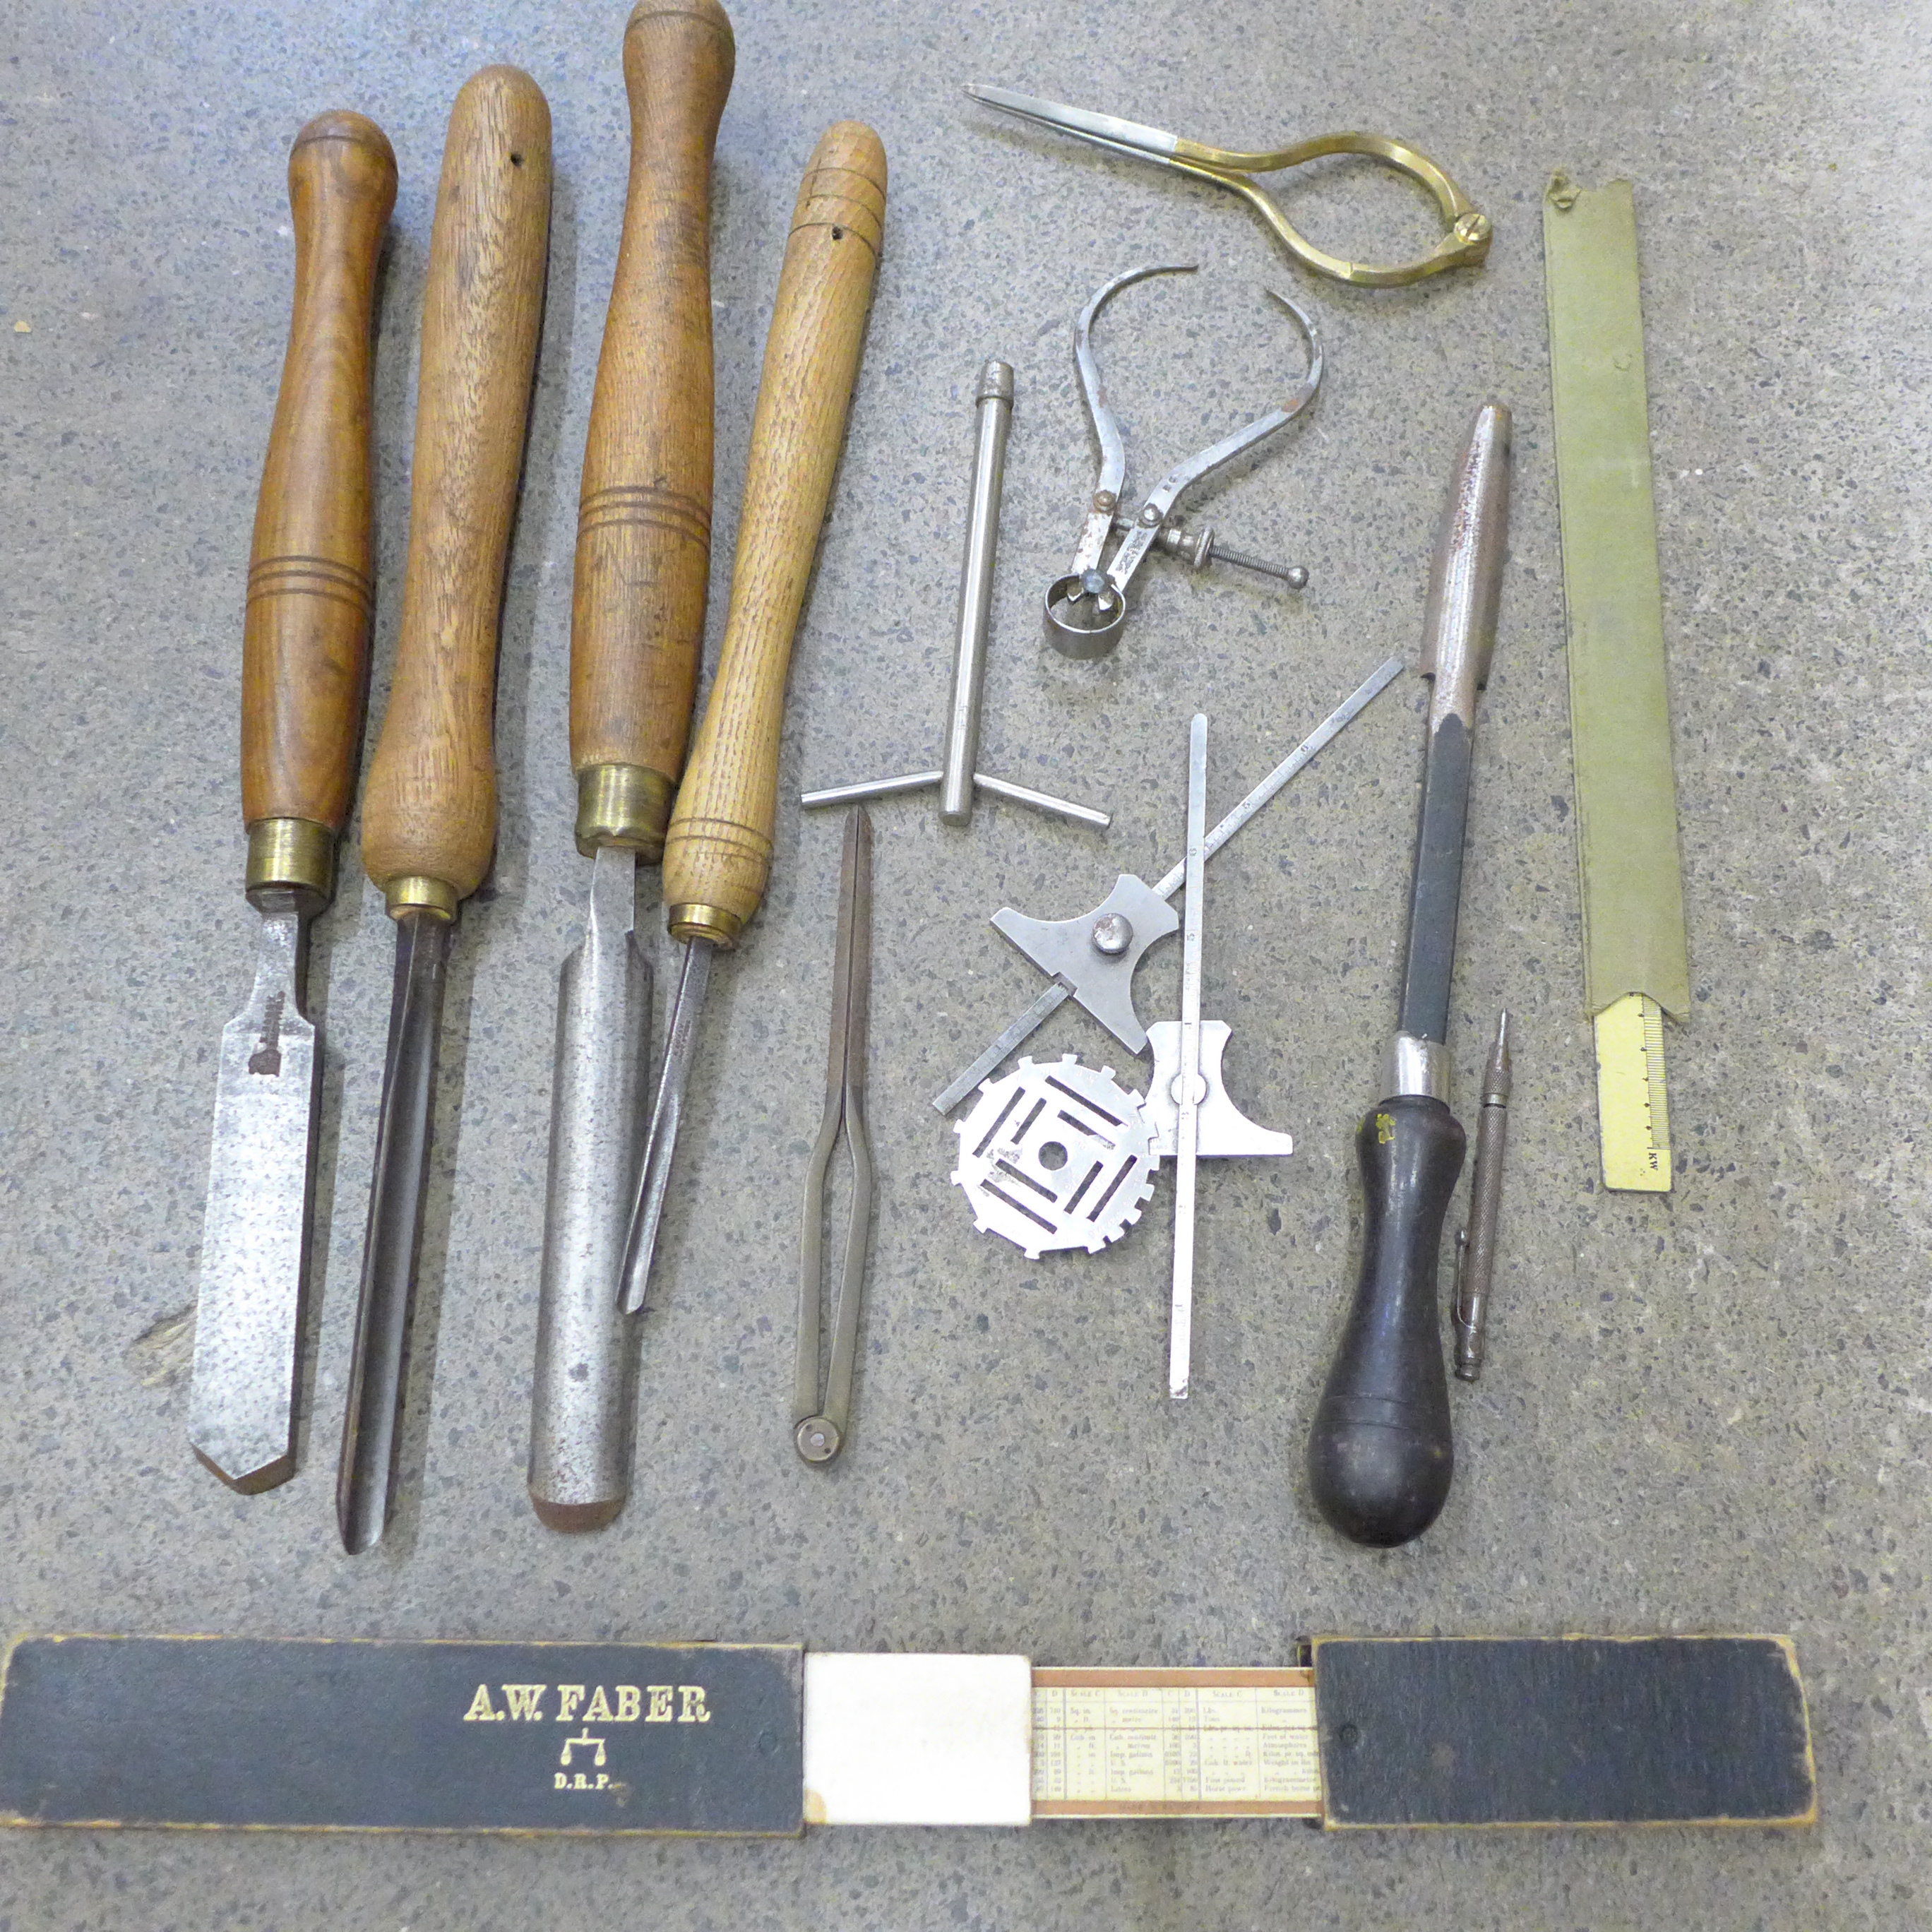 Five carving chisels and engineering items including depth gauges and calipers